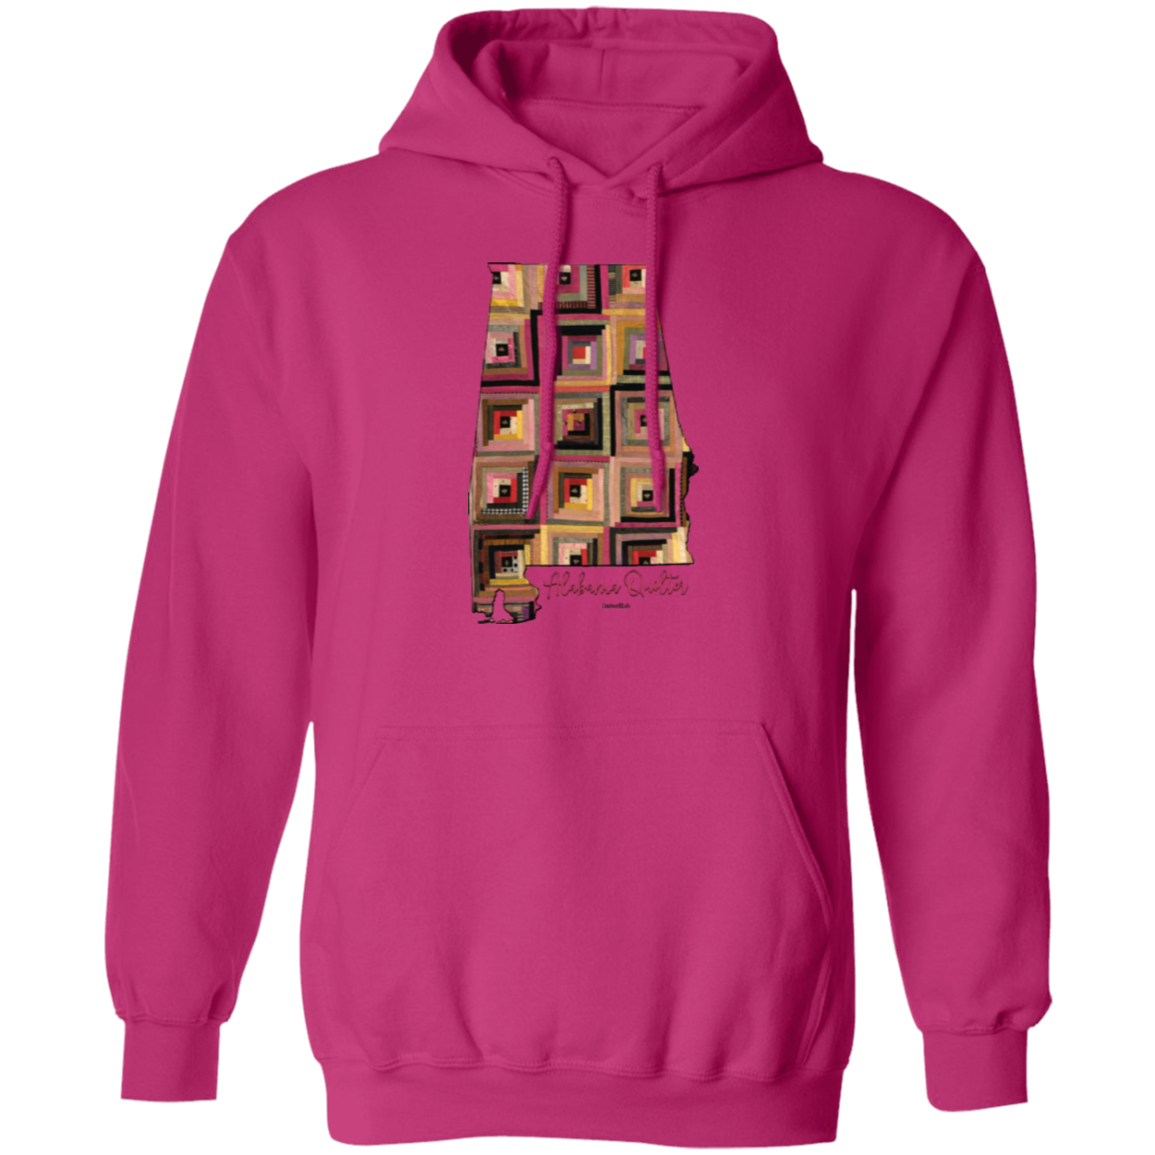 Alabama Quilter Pullover Hoodie, Gift for Quilting Friends and Family